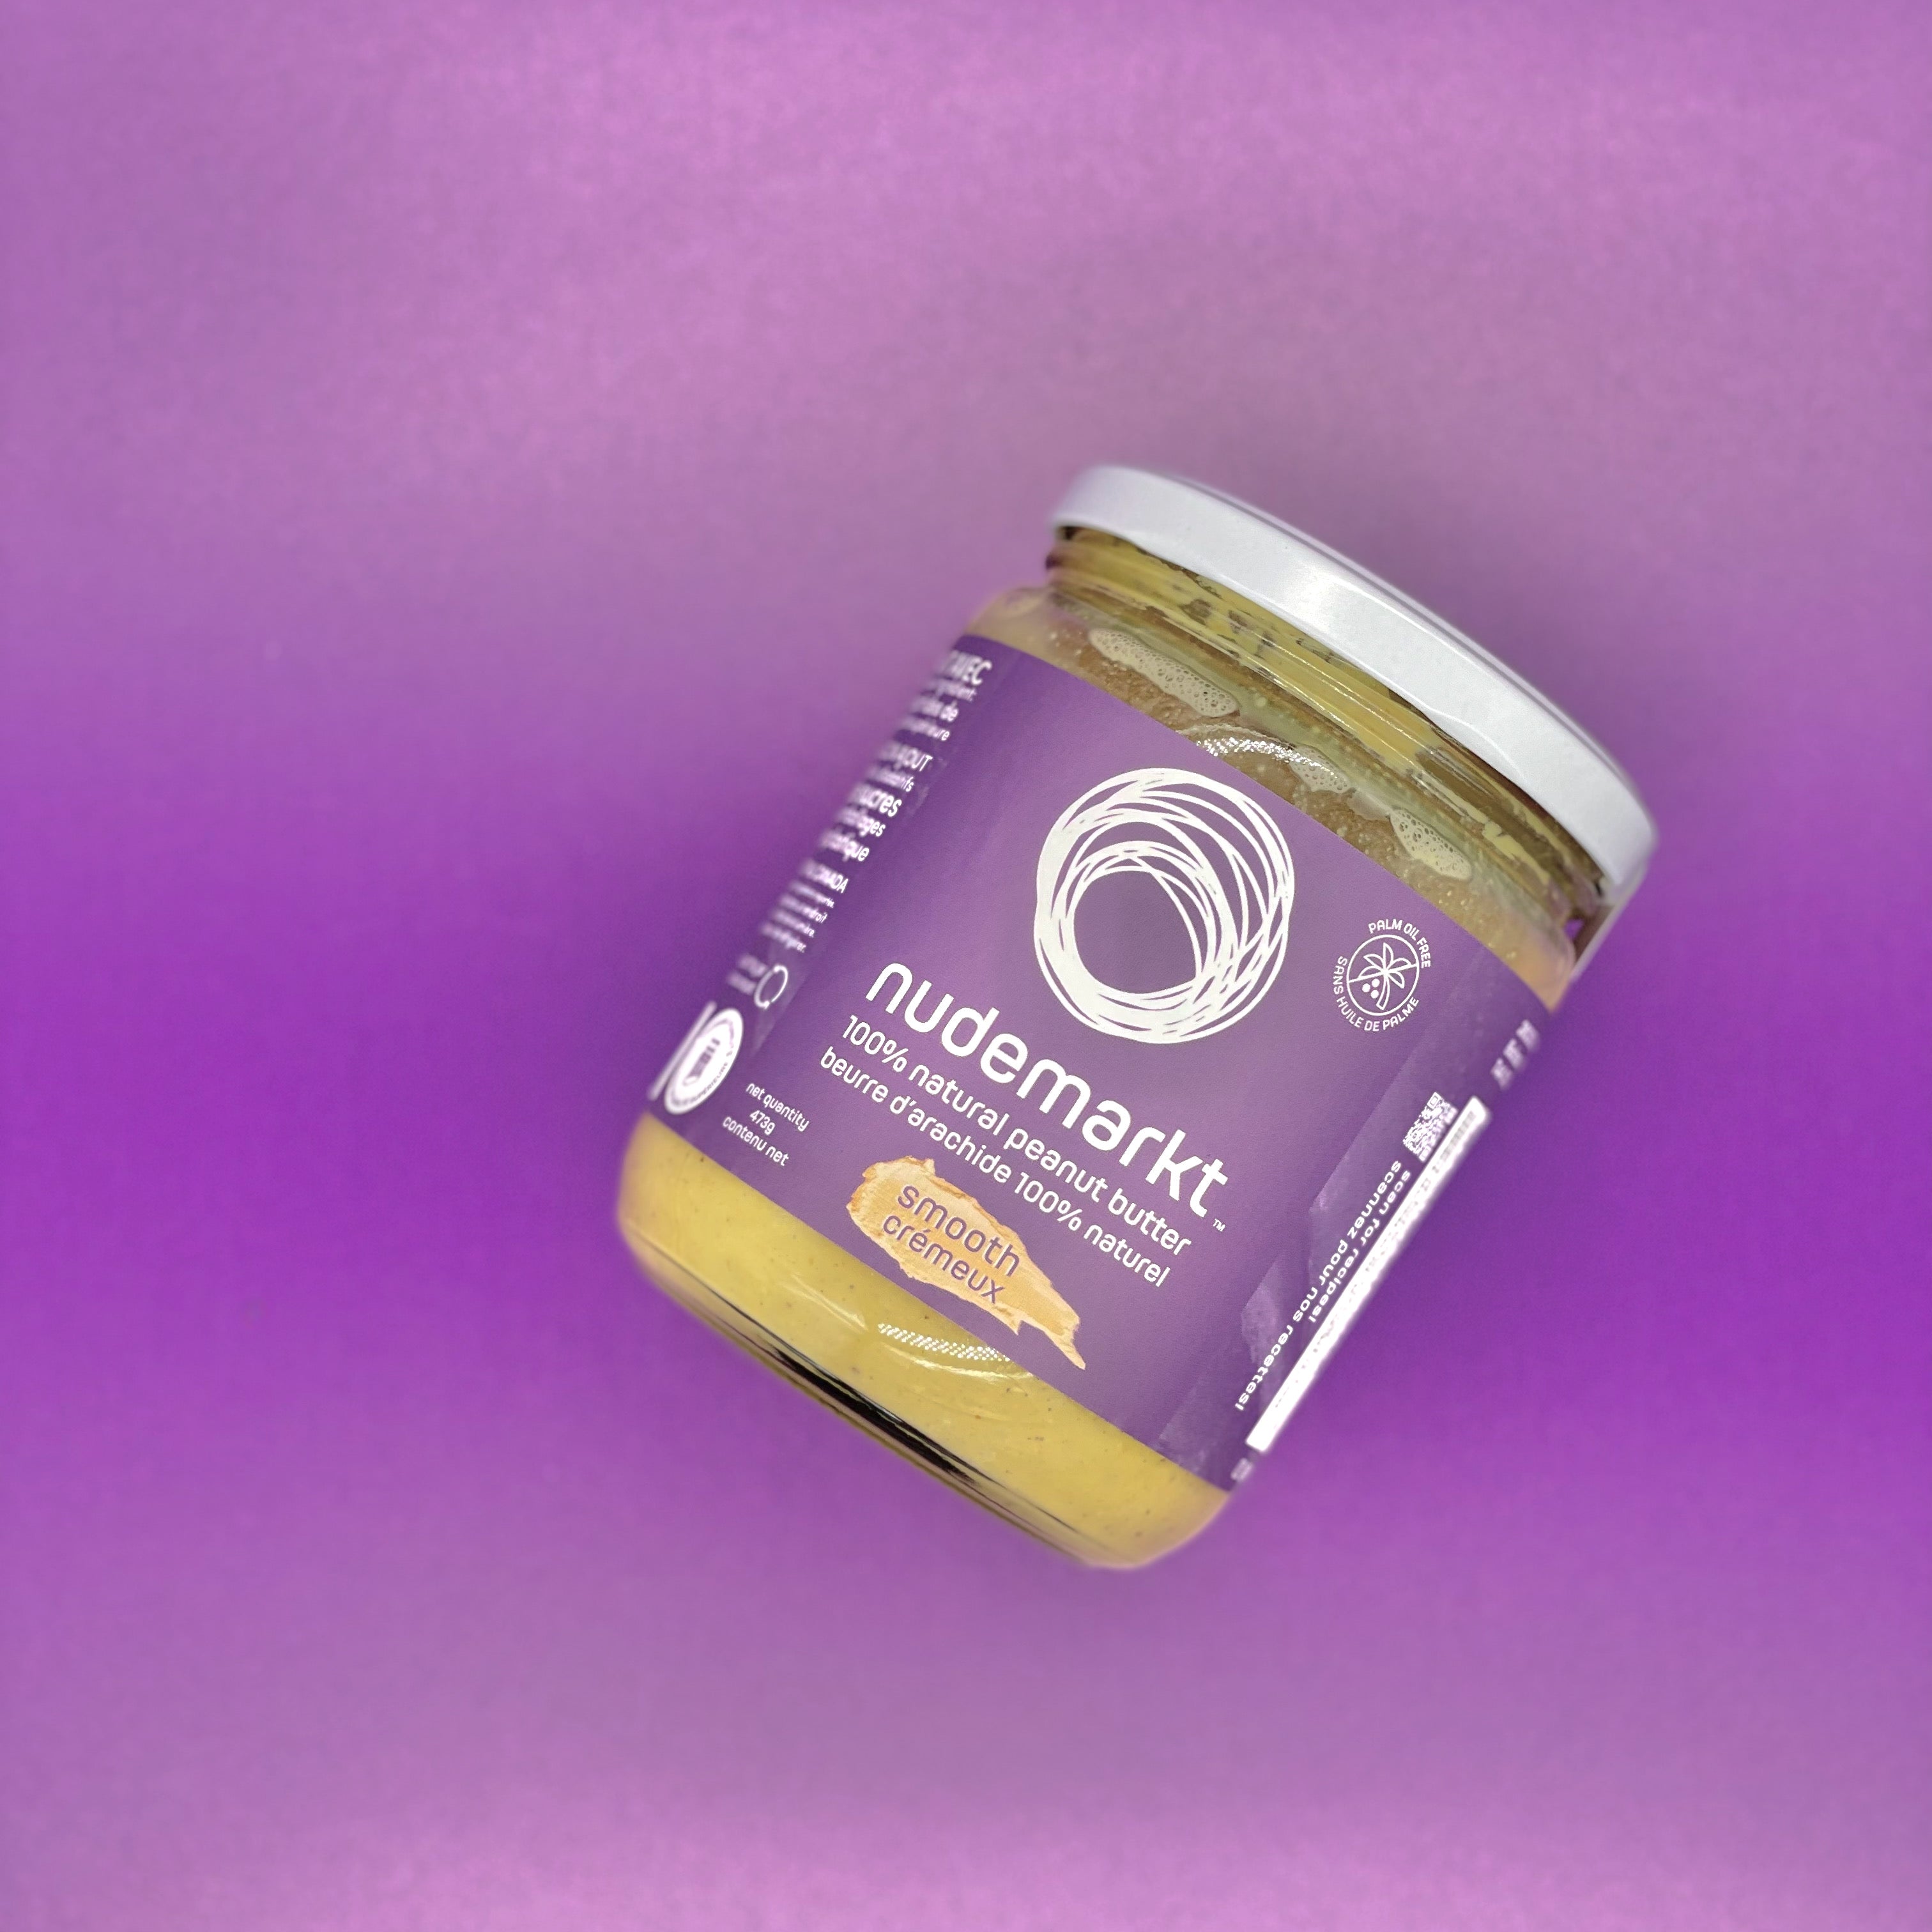 Natural Peanut Butter - Smooth